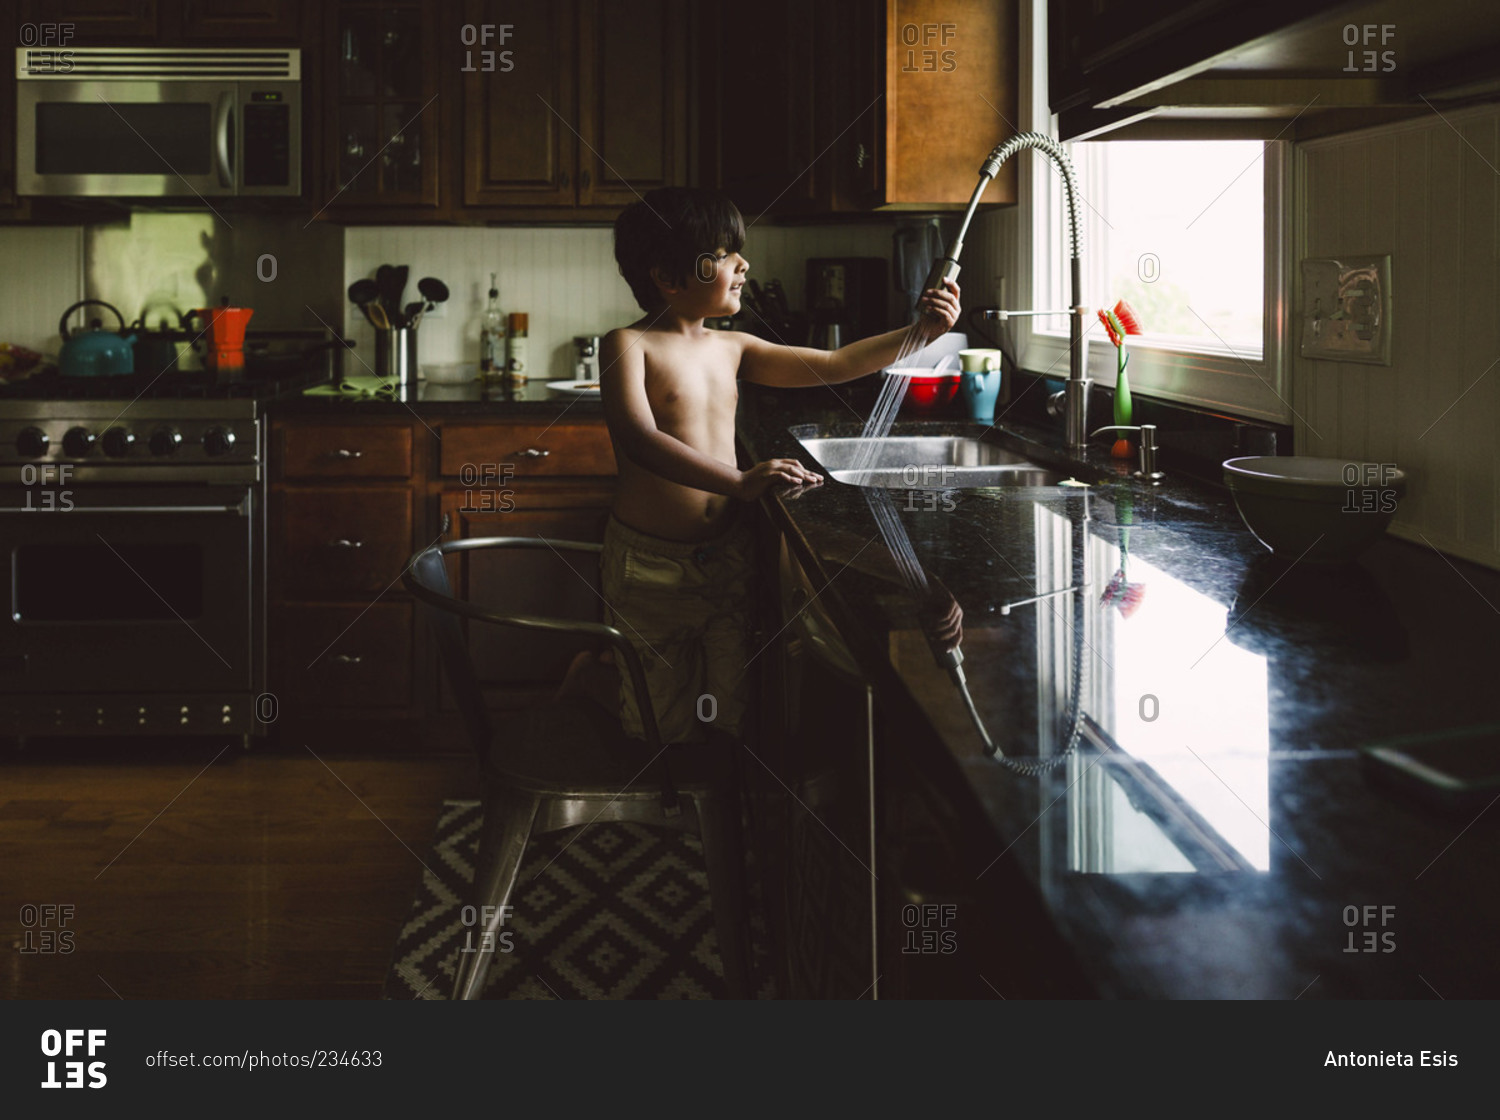 A boy kneels on a chair and rinses food in a sink